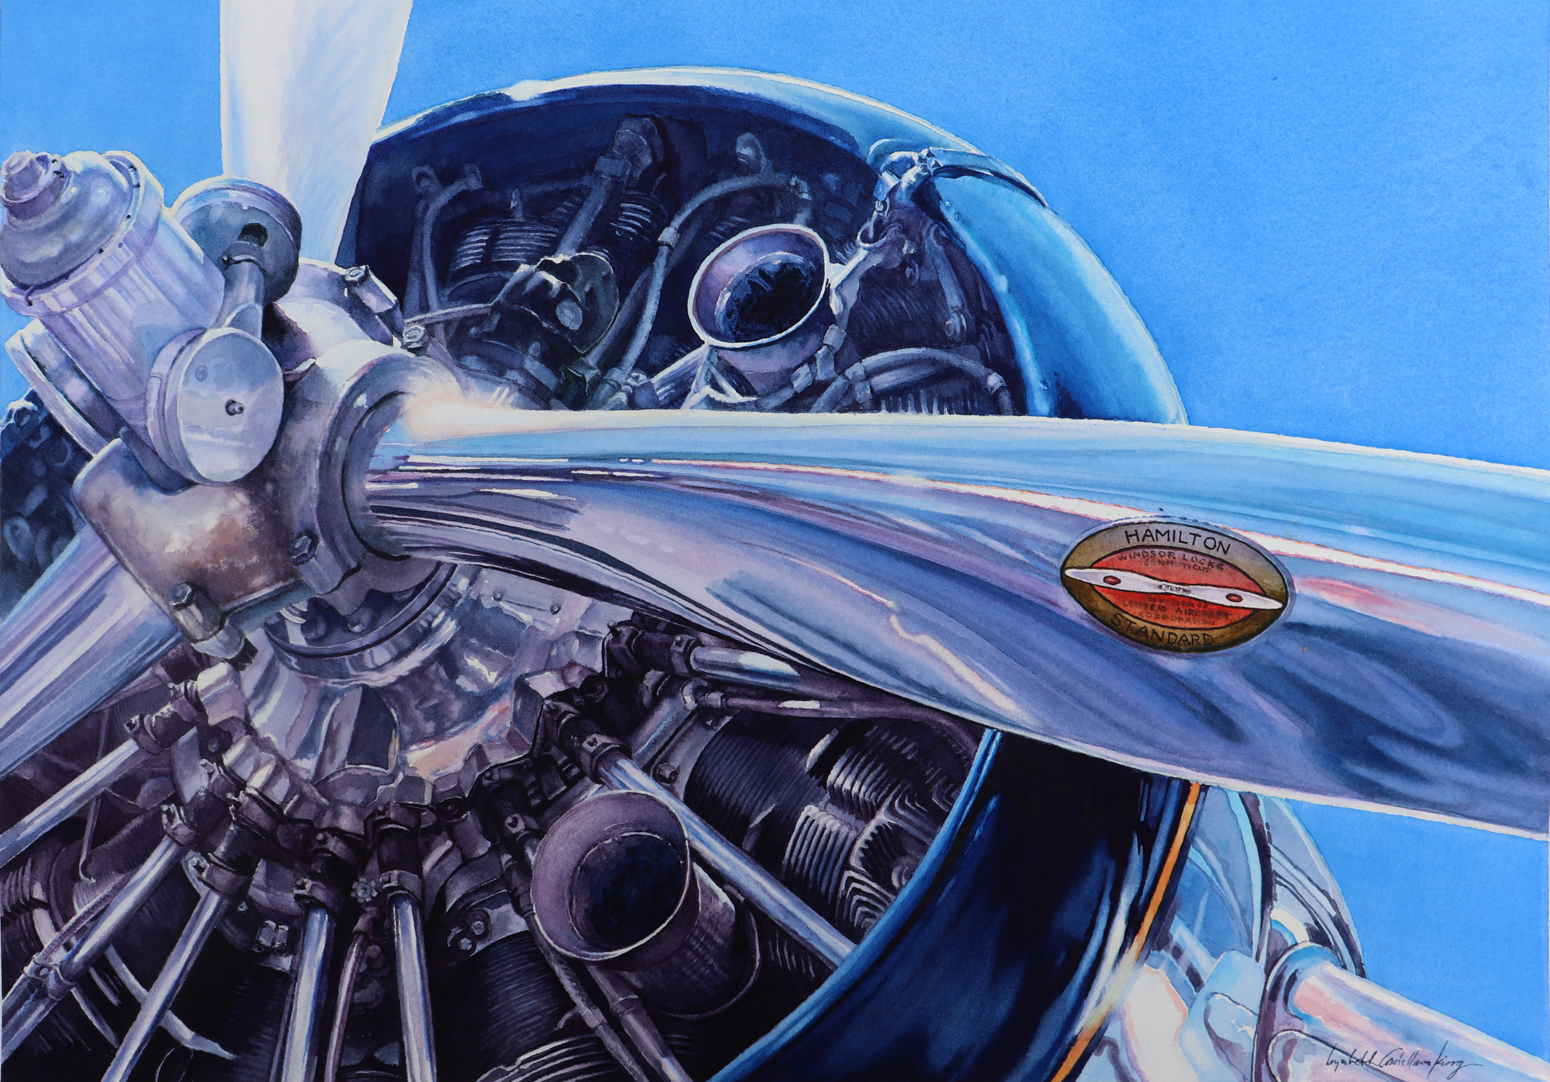 A close-up depiction of an airplane engine and propeller in shades of blue